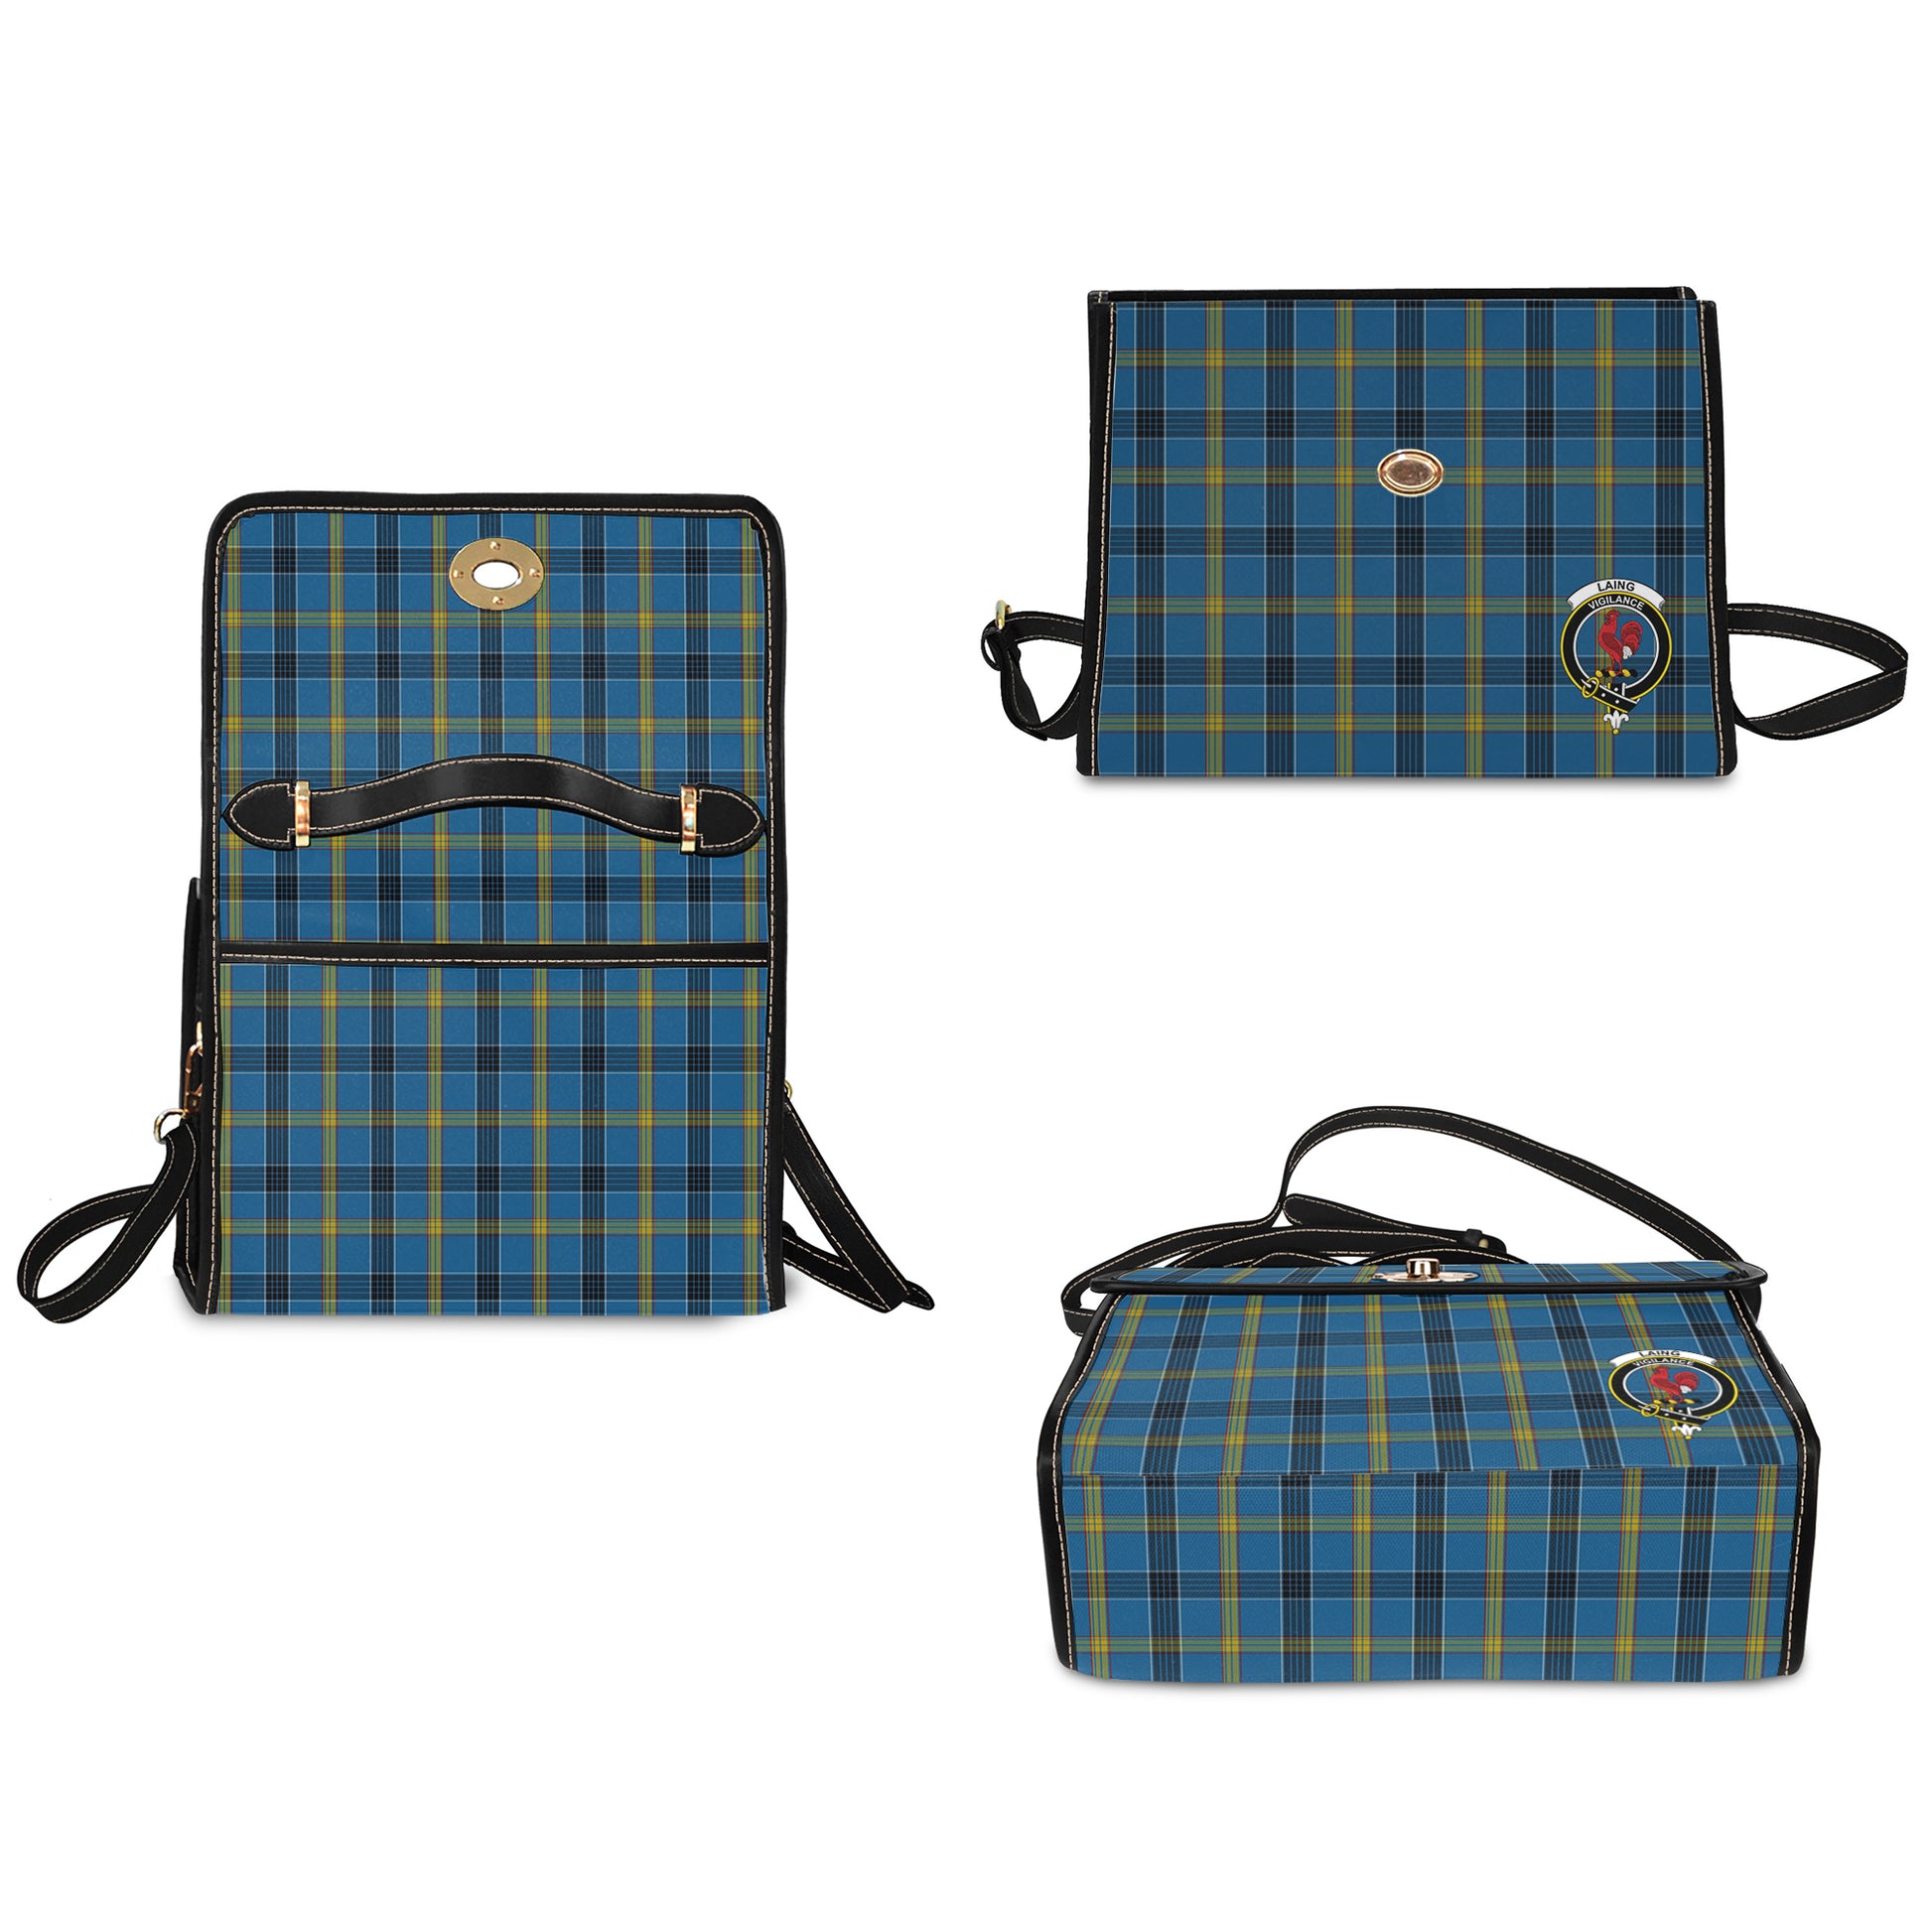 laing-tartan-leather-strap-waterproof-canvas-bag-with-family-crest